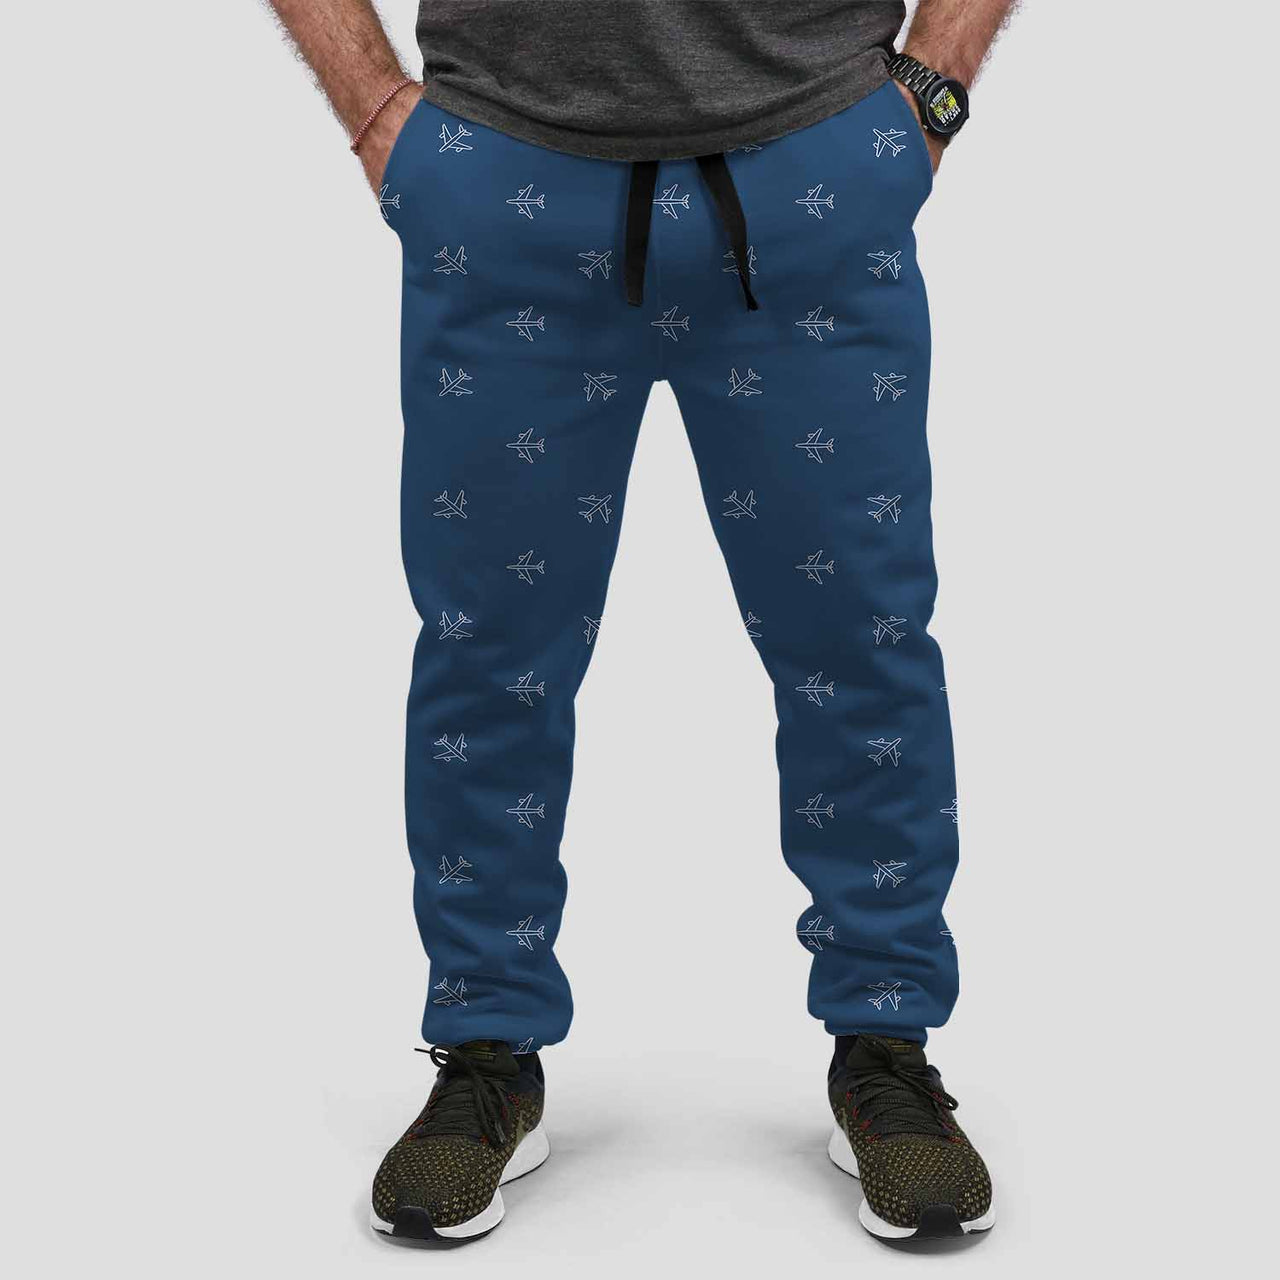 Nice Airplanes Designed Sweat Pants & Trousers